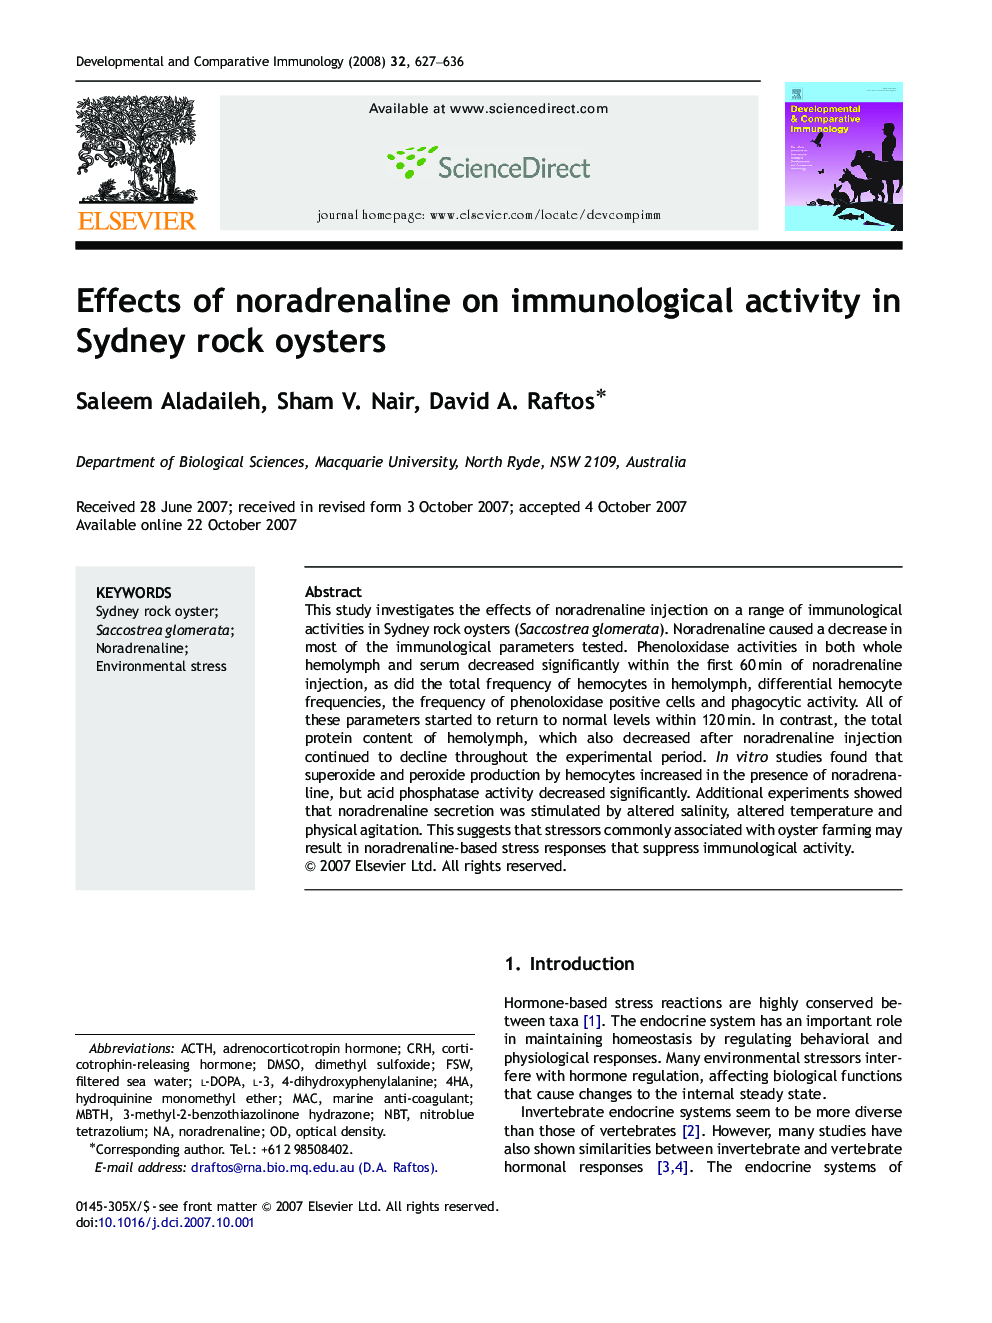 Effects of noradrenaline on immunological activity in Sydney rock oysters